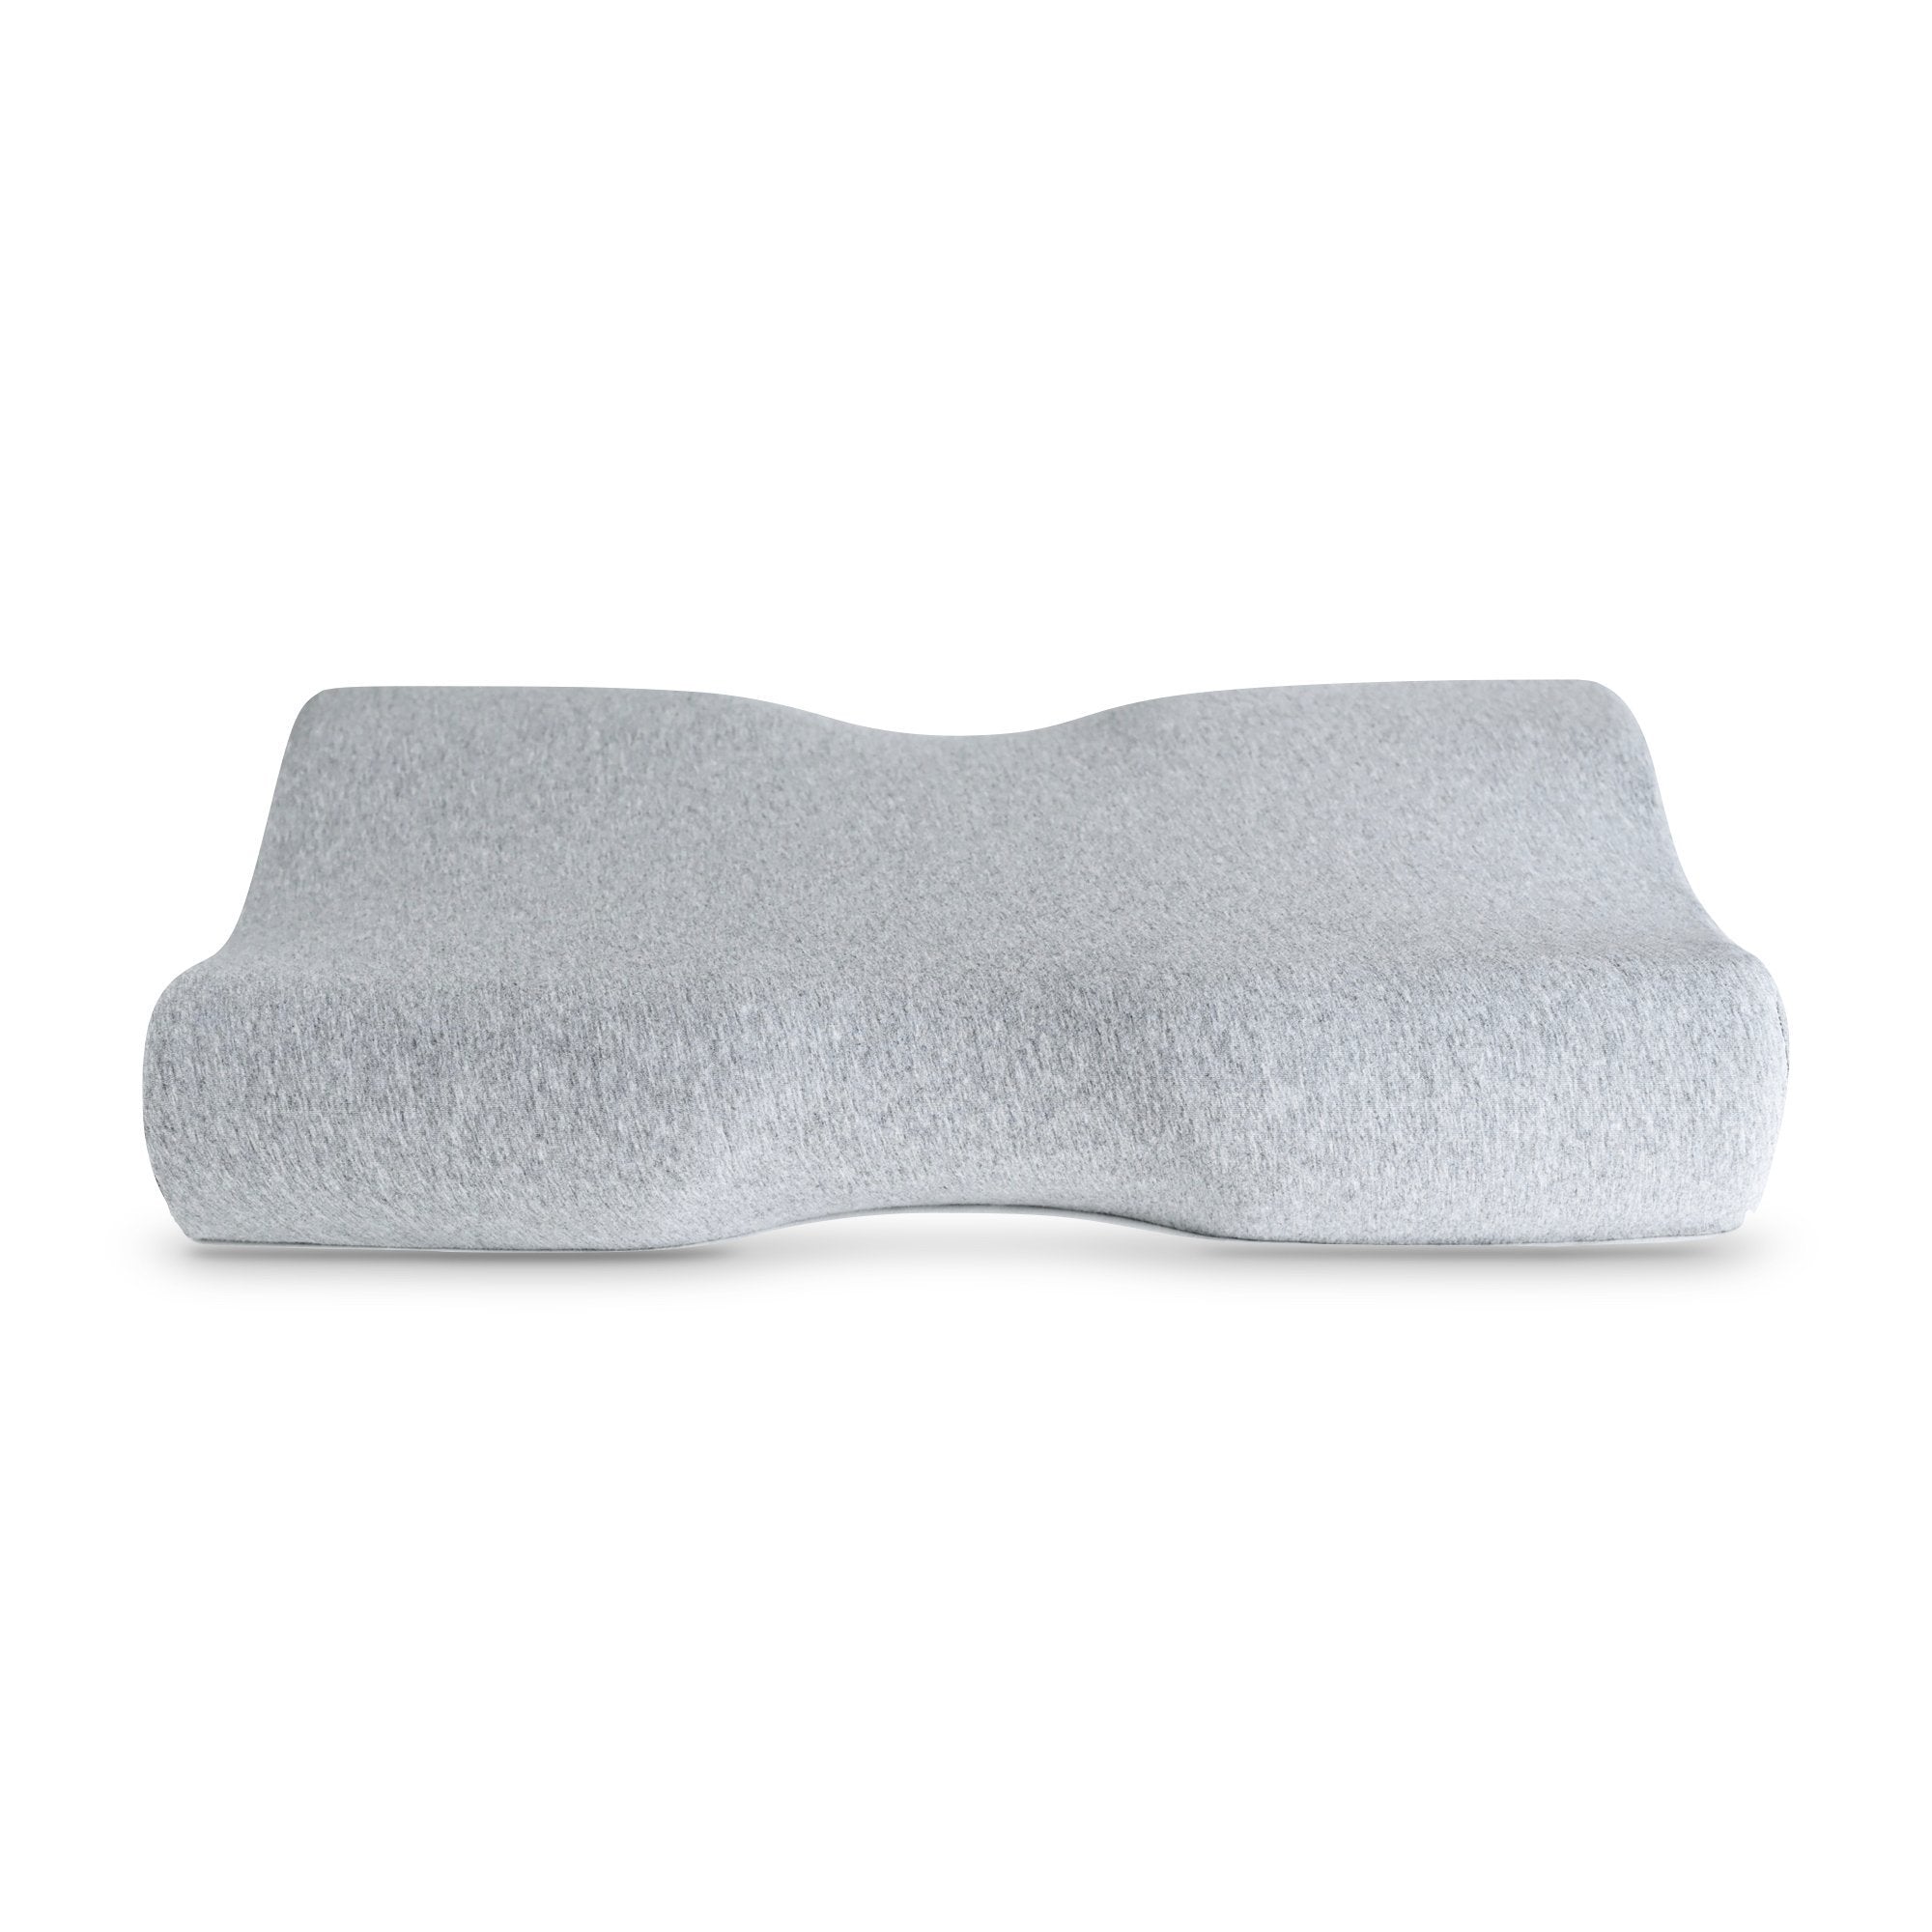 Cushion Lab Extra Dense Ergonomic Cervical Pillow for Firm Neck Support - Orthopedic Contour Pillow for Back / Side Sleeper Neck Relief, CertiPURUS